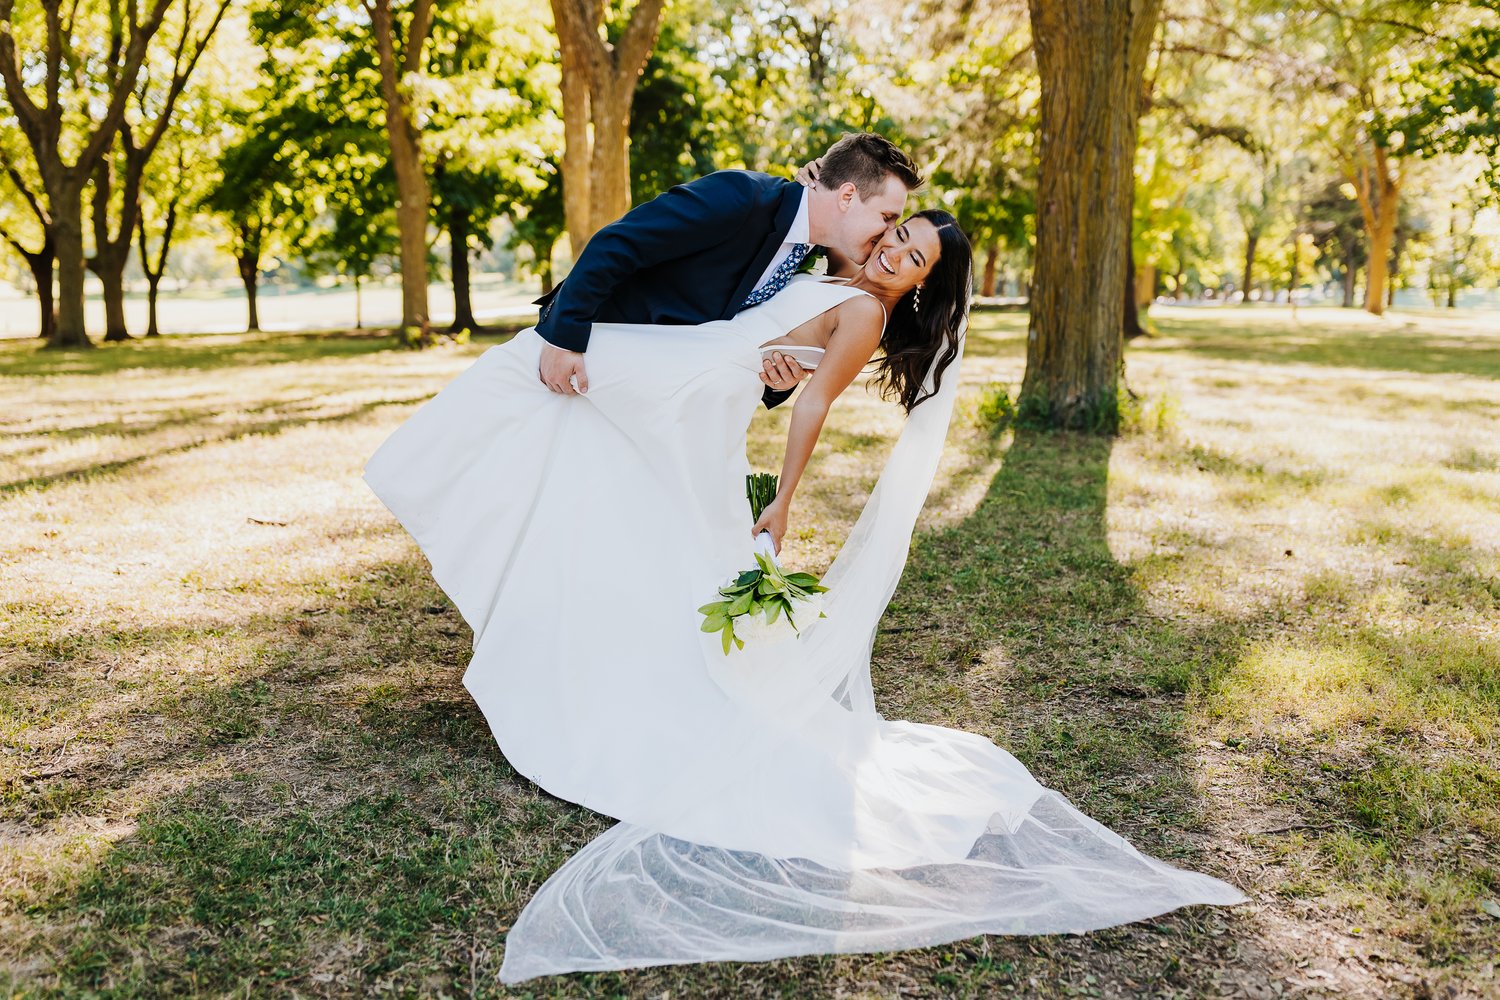 Capturing Ceaselessly: The Artistry and Significance of a Wedding Photographer